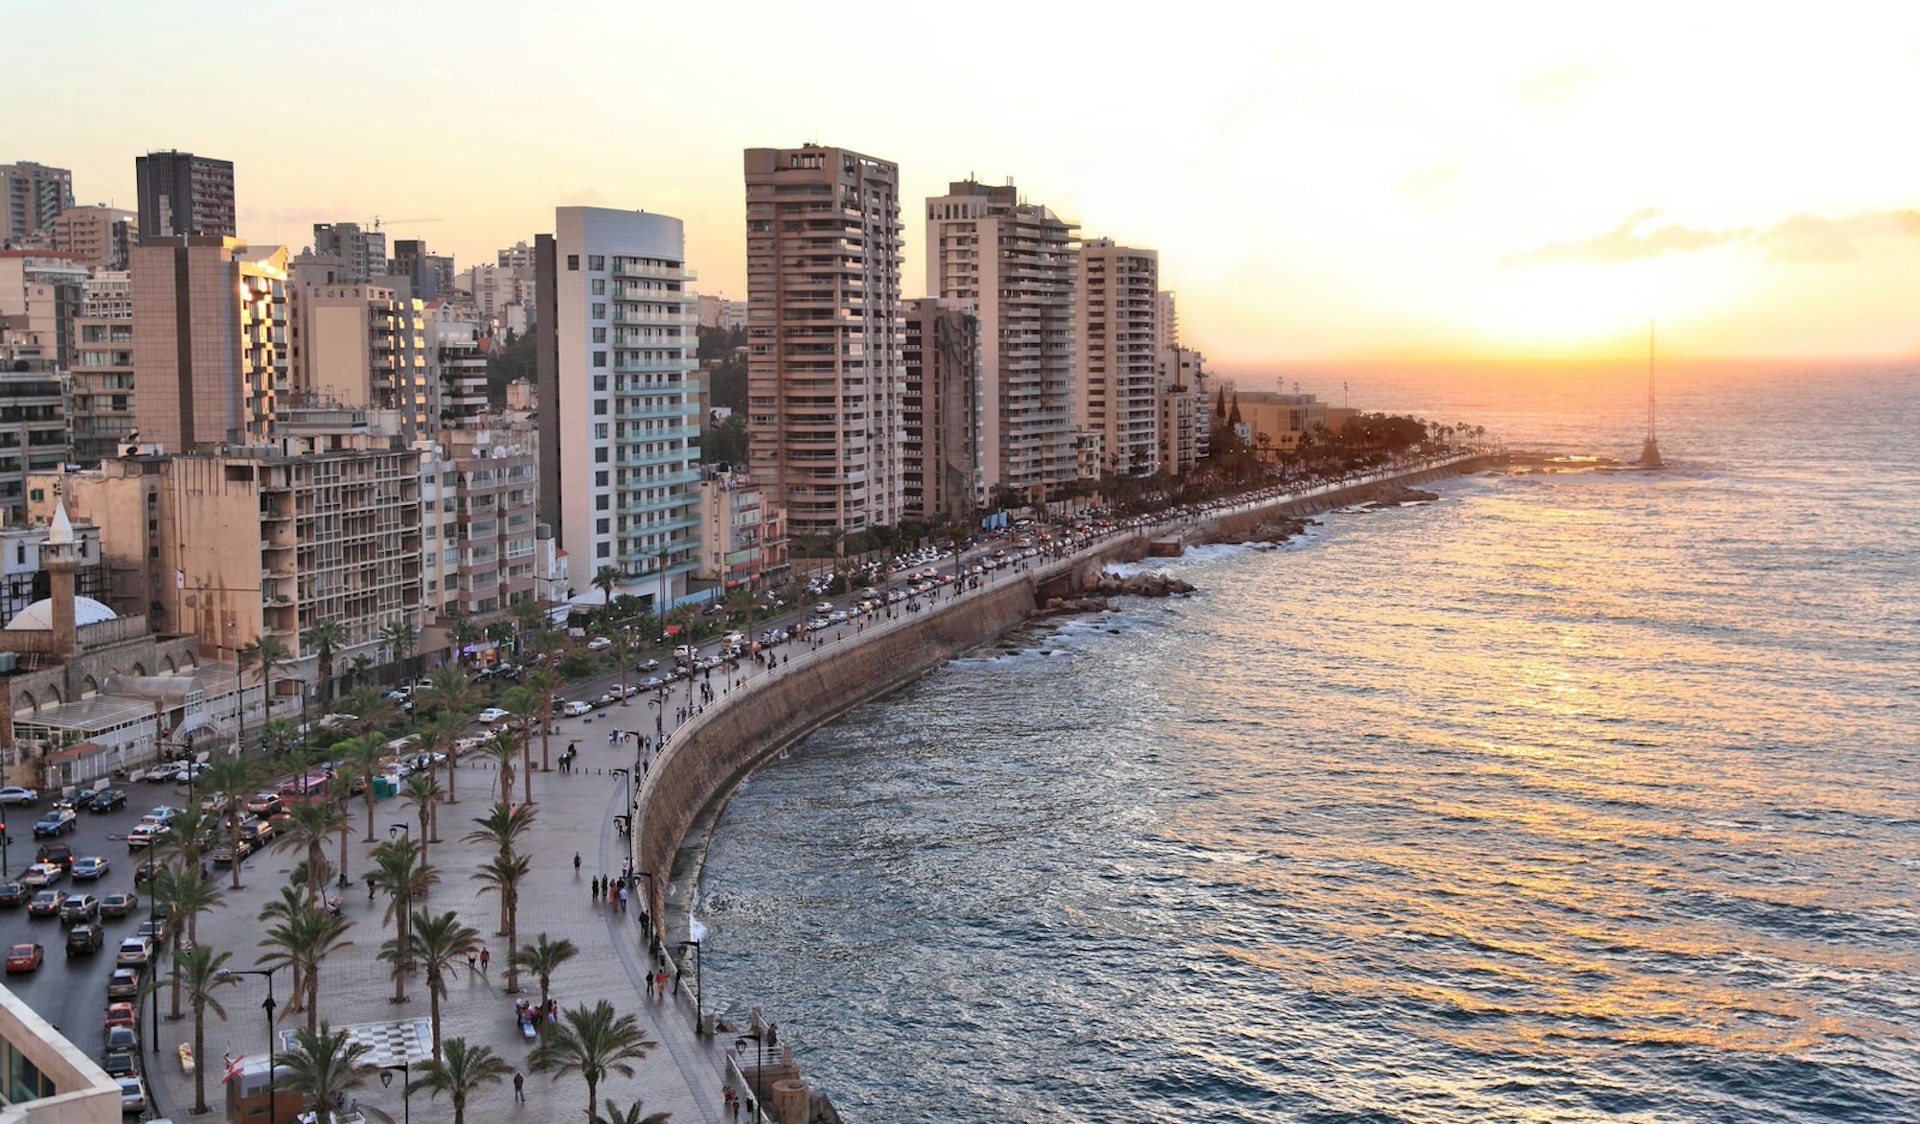 Sunset view along the Corniche in Beirut. Image by diak / Shutterstock